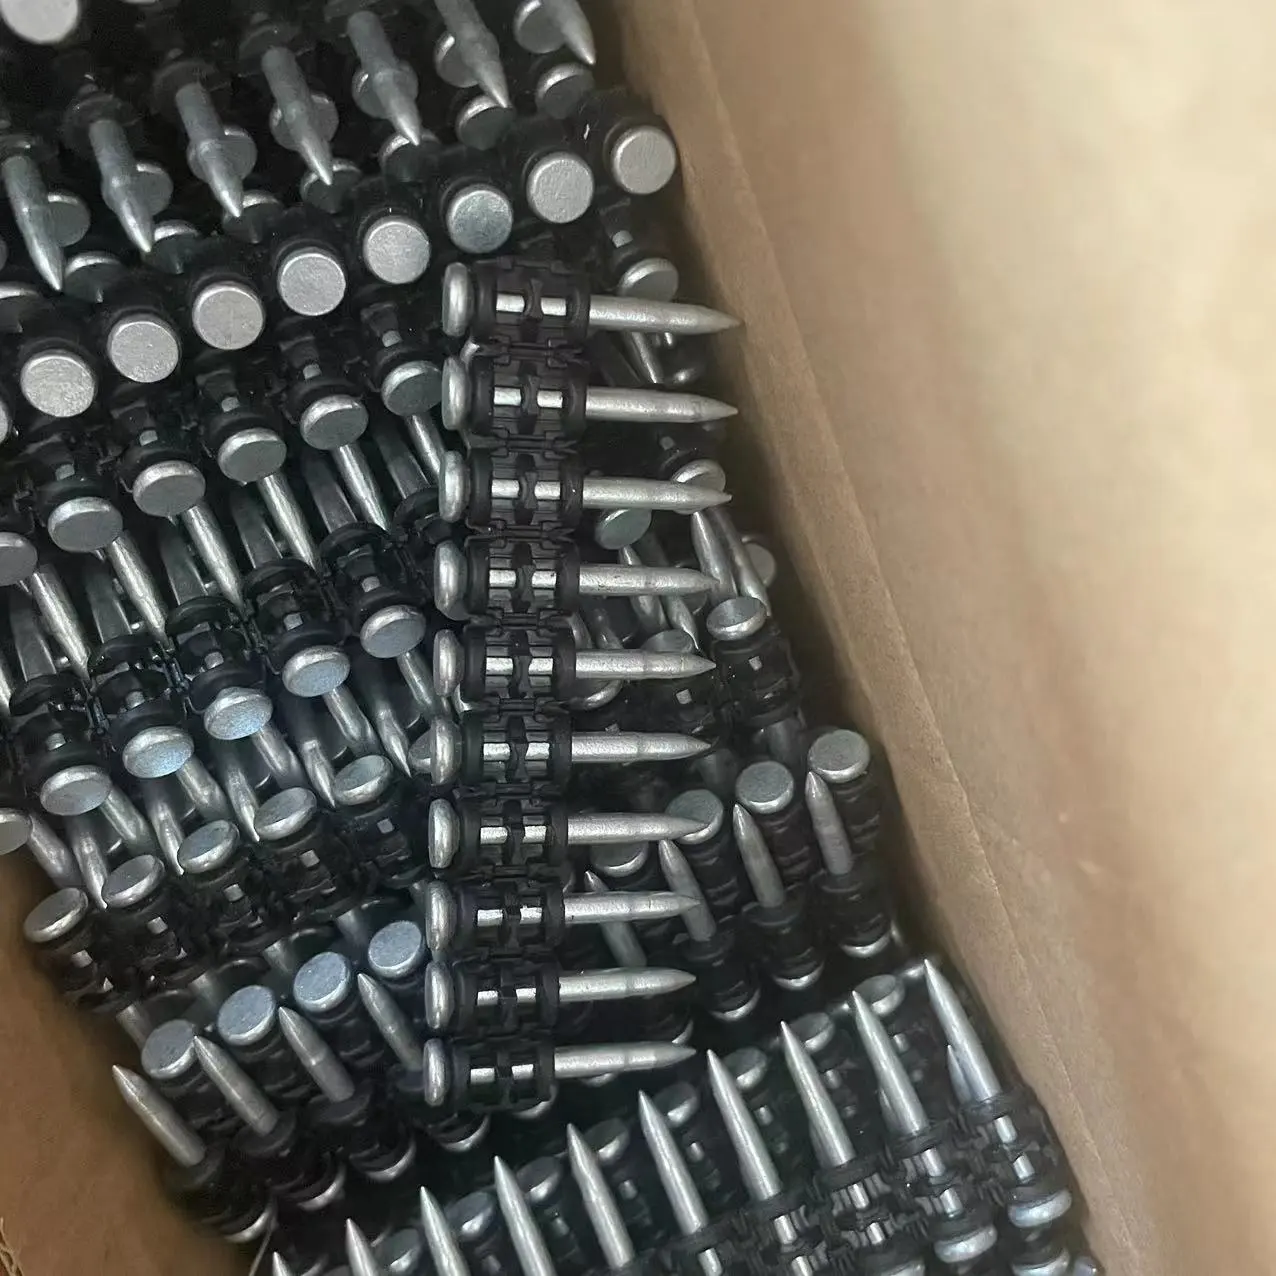 Manufacturers produce high quality gas finishing BX319mm 22mmshooting nails for BX3 nail guns